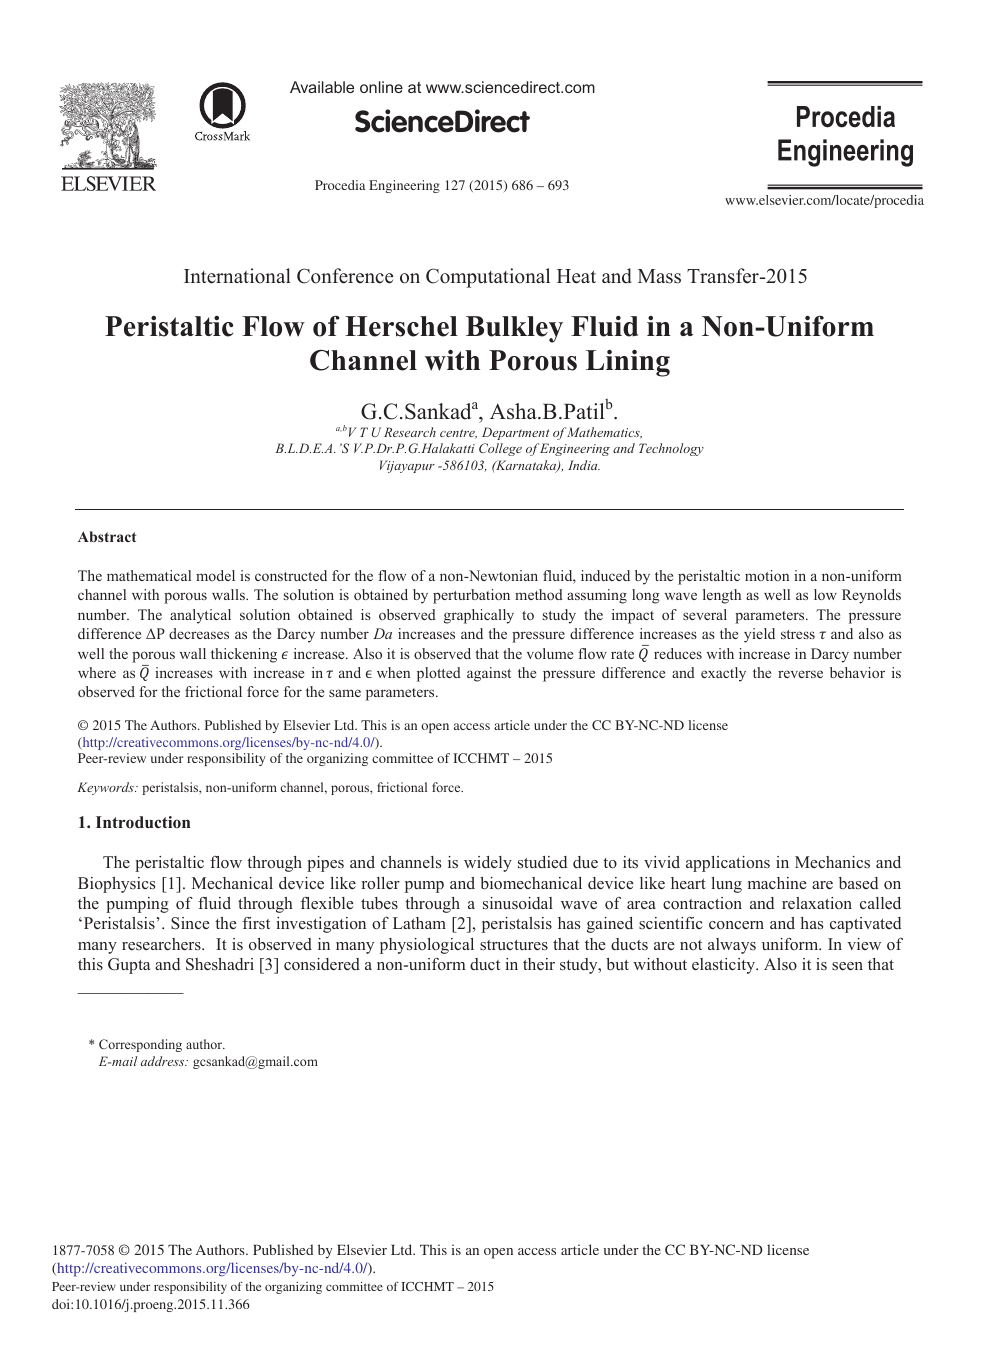 Peristaltic Flow Of Herschel Bulkley Fluid In A Non Uniform Channel With Porous Lining Topic Of Research Paper In Materials Engineering Download Scholarly Article Pdf And Read For Free On Cyberleninka Open